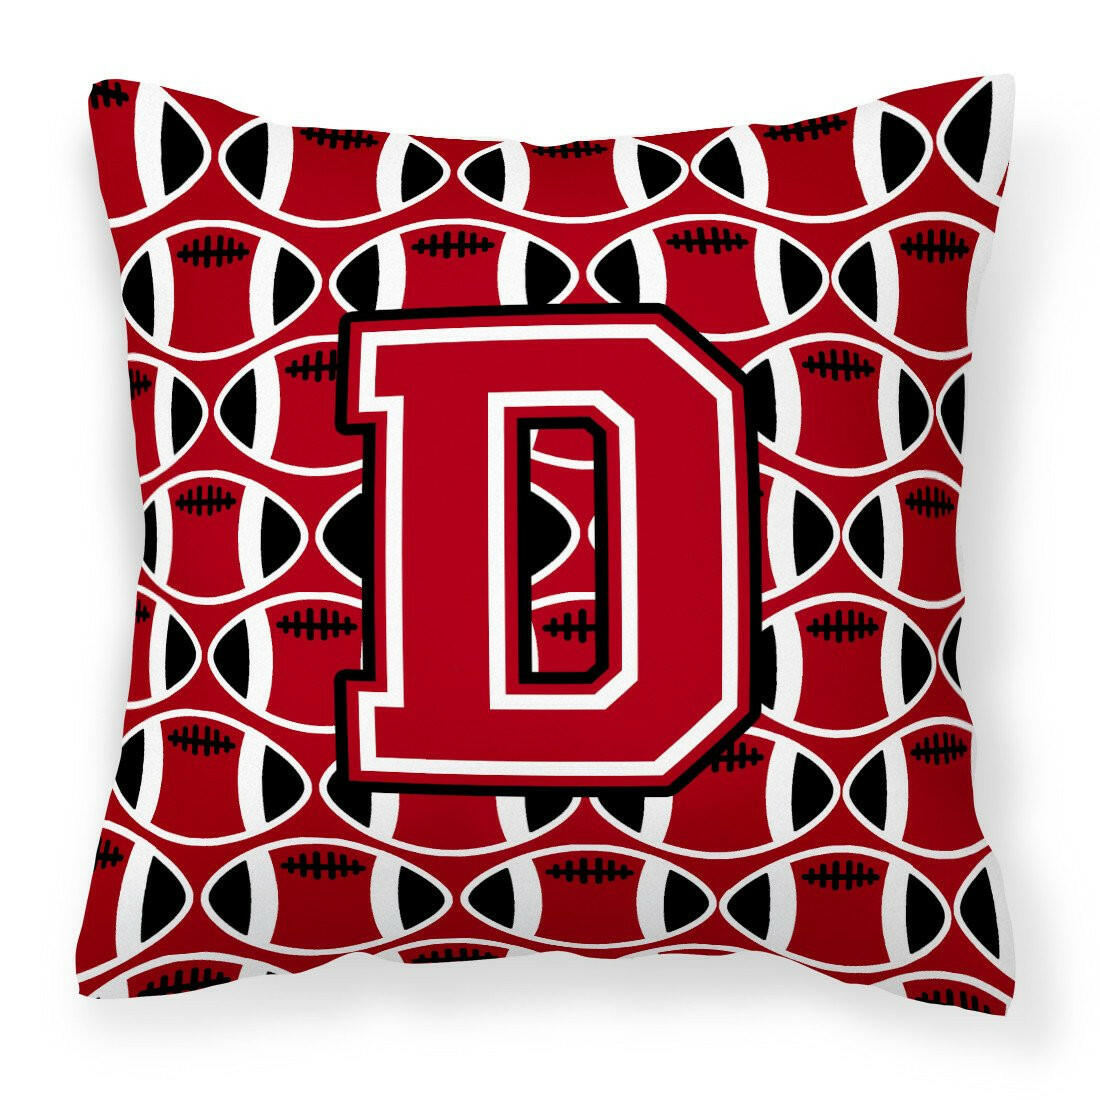 Letter D Football Red, Black and White Fabric Decorative Pillow CJ1073-DPW1414 by Caroline's Treasures